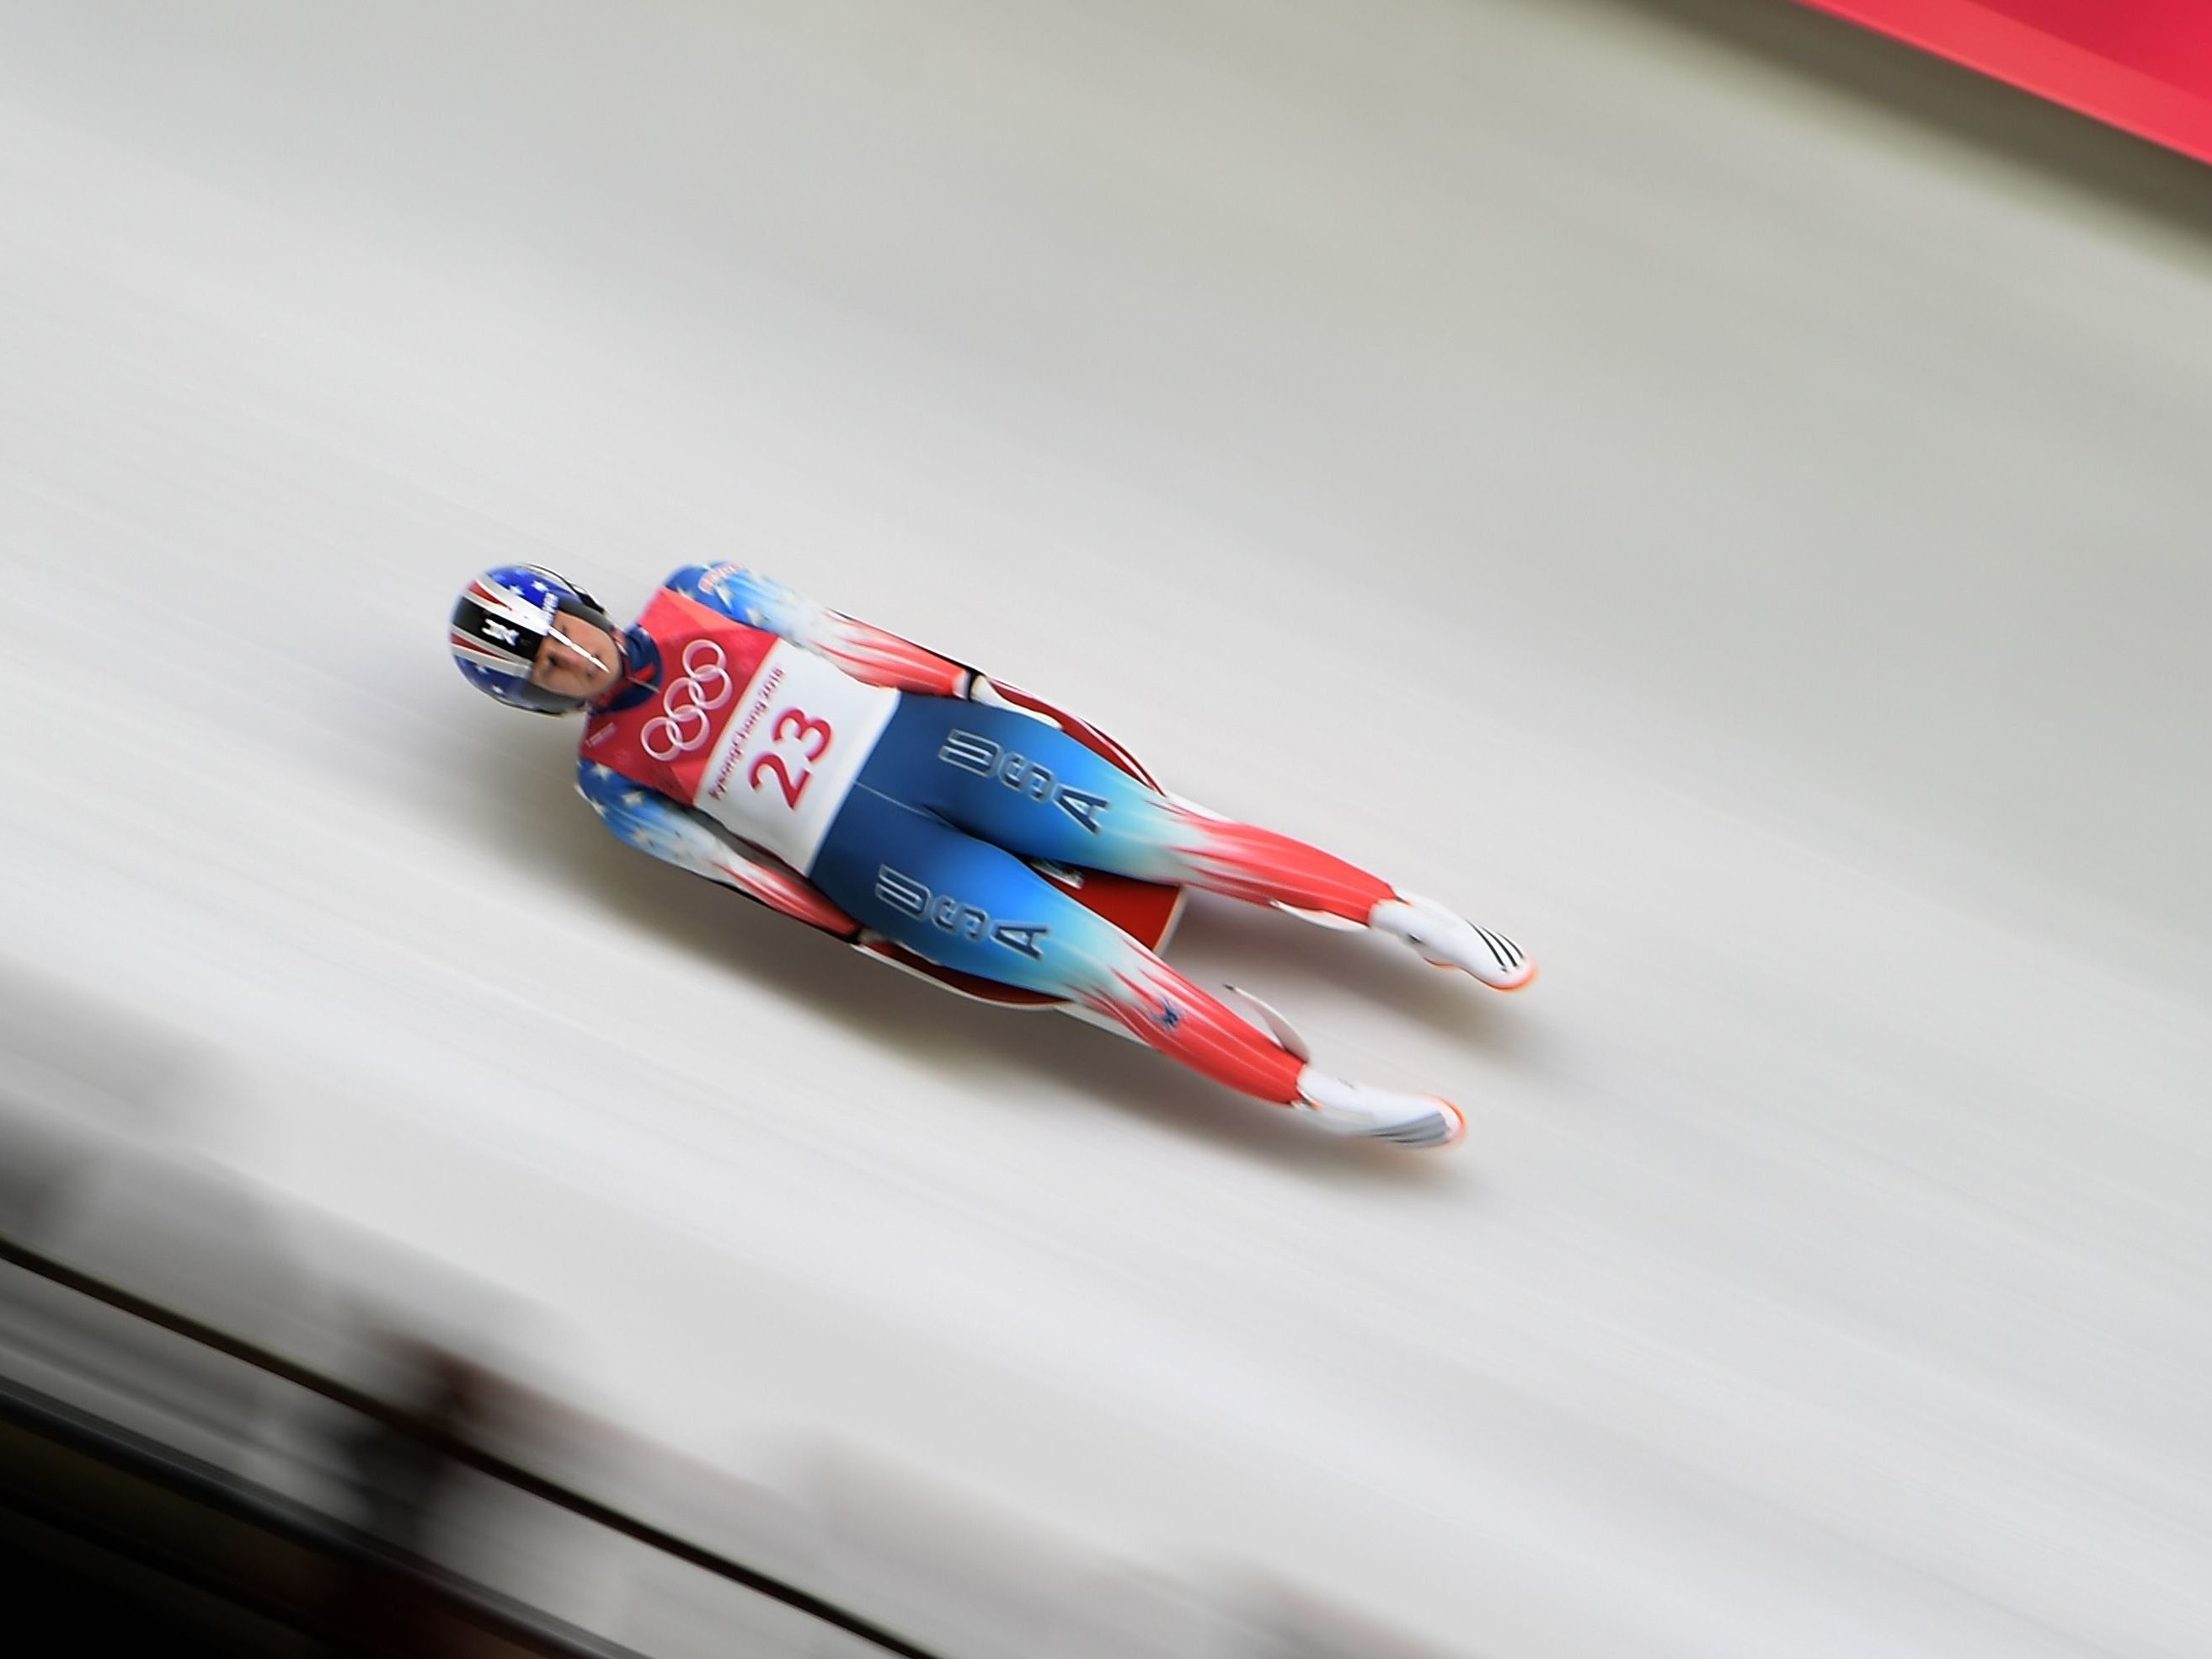 Luge: Emily Sweeney, An American luger, The 2019 FIL World Luge Championships bronze medalist. 2630x1970 HD Wallpaper.